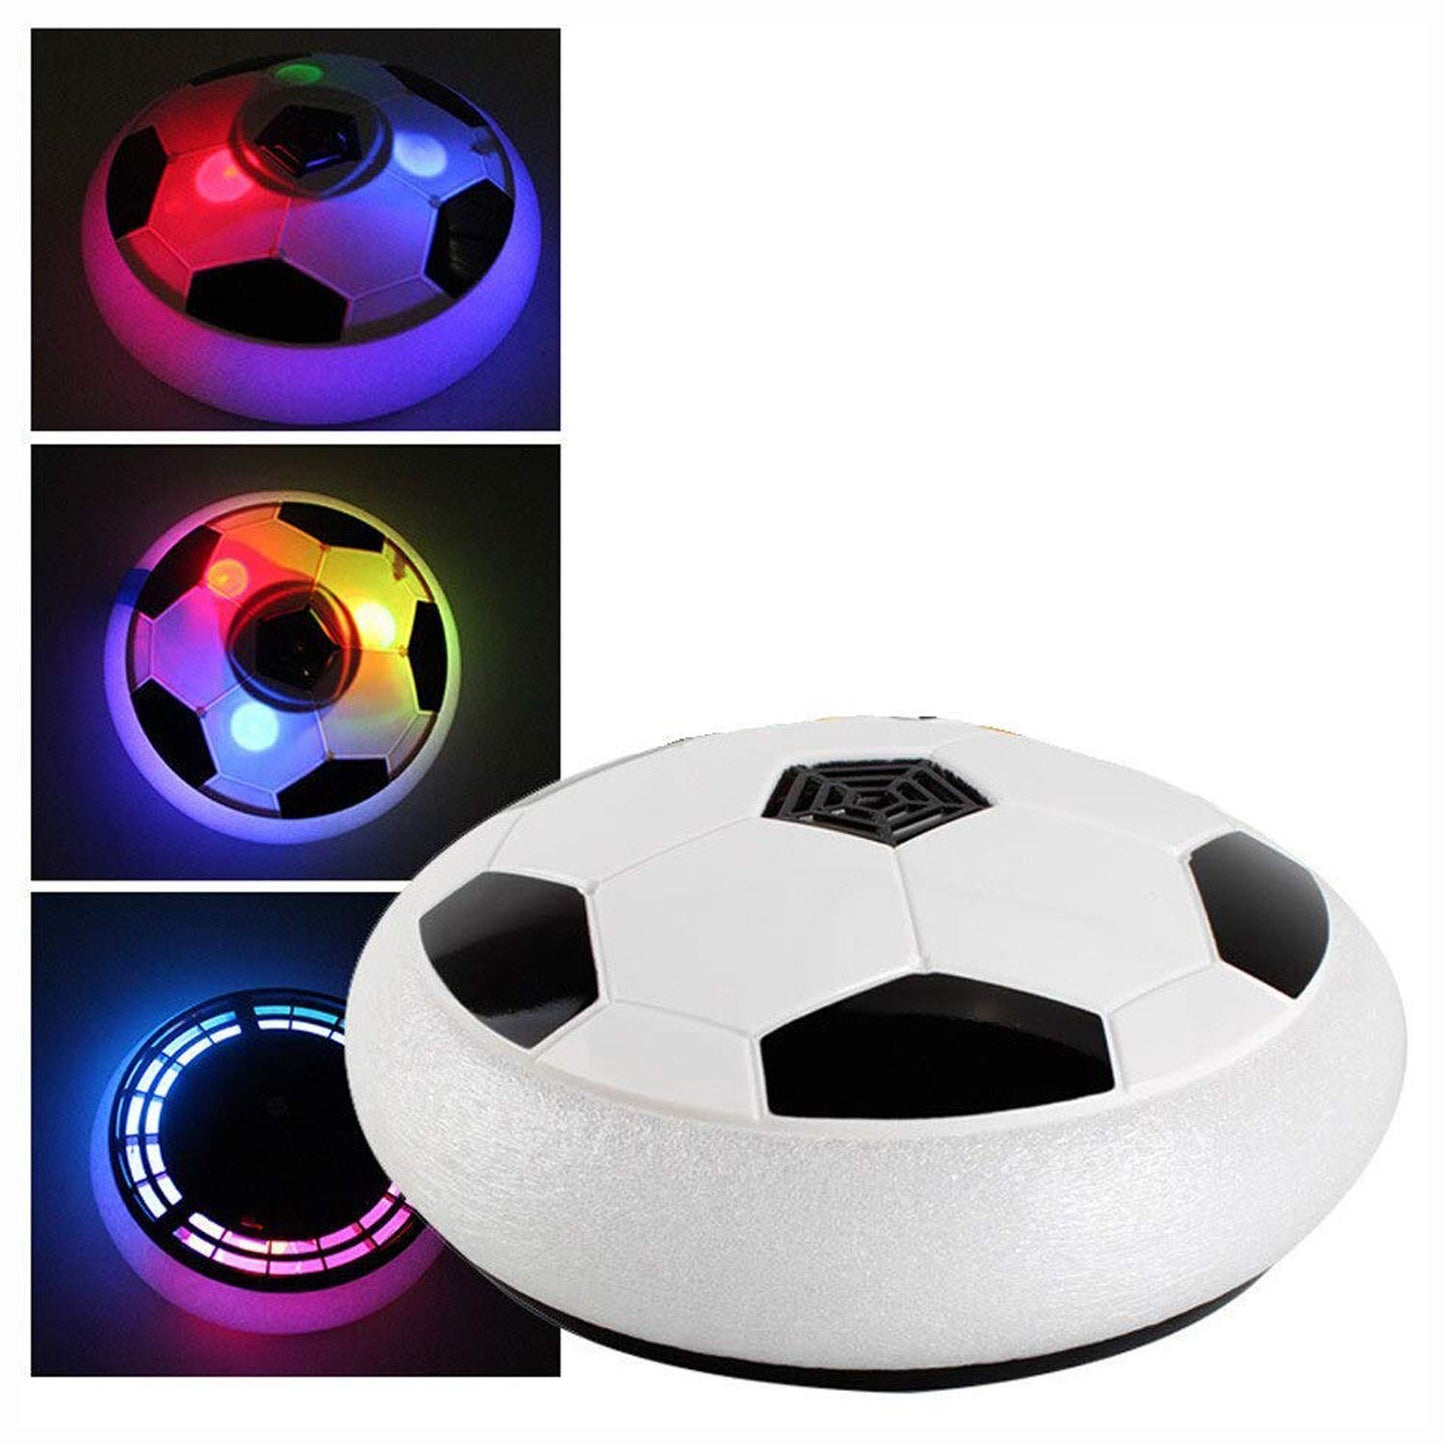 Hover soccer ball | with Foam Bumpers and Colorful LED Lights | hover ball